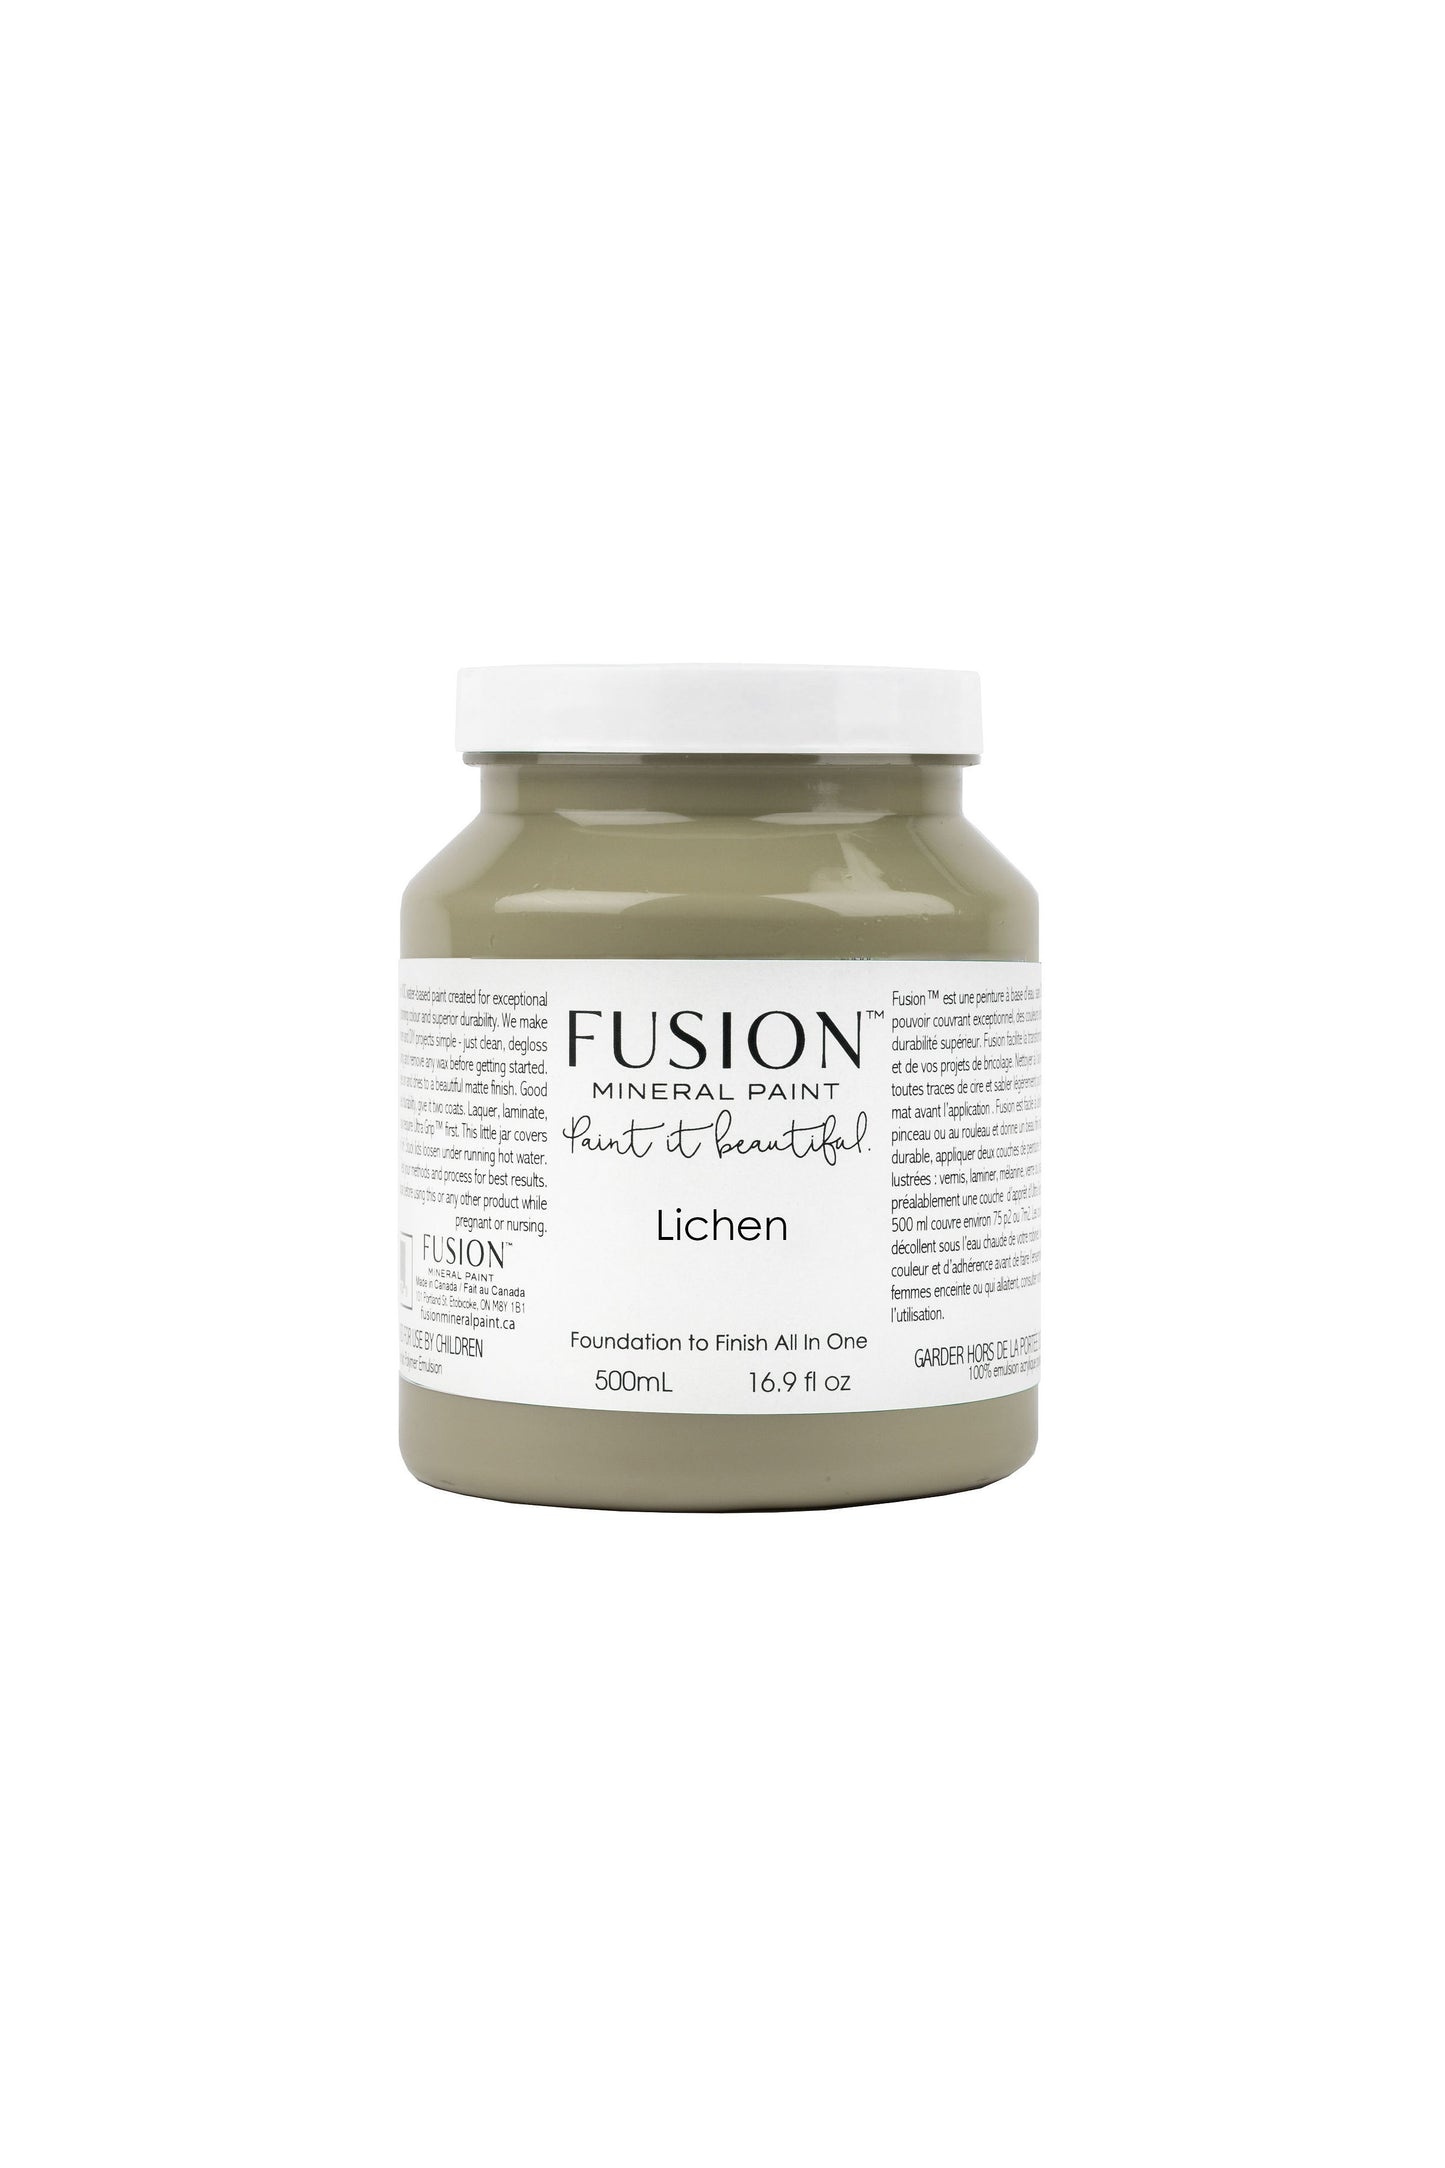 Lichen Fusion Mineral Pain, Grey-Green Paint Color| 500ml Pint Size